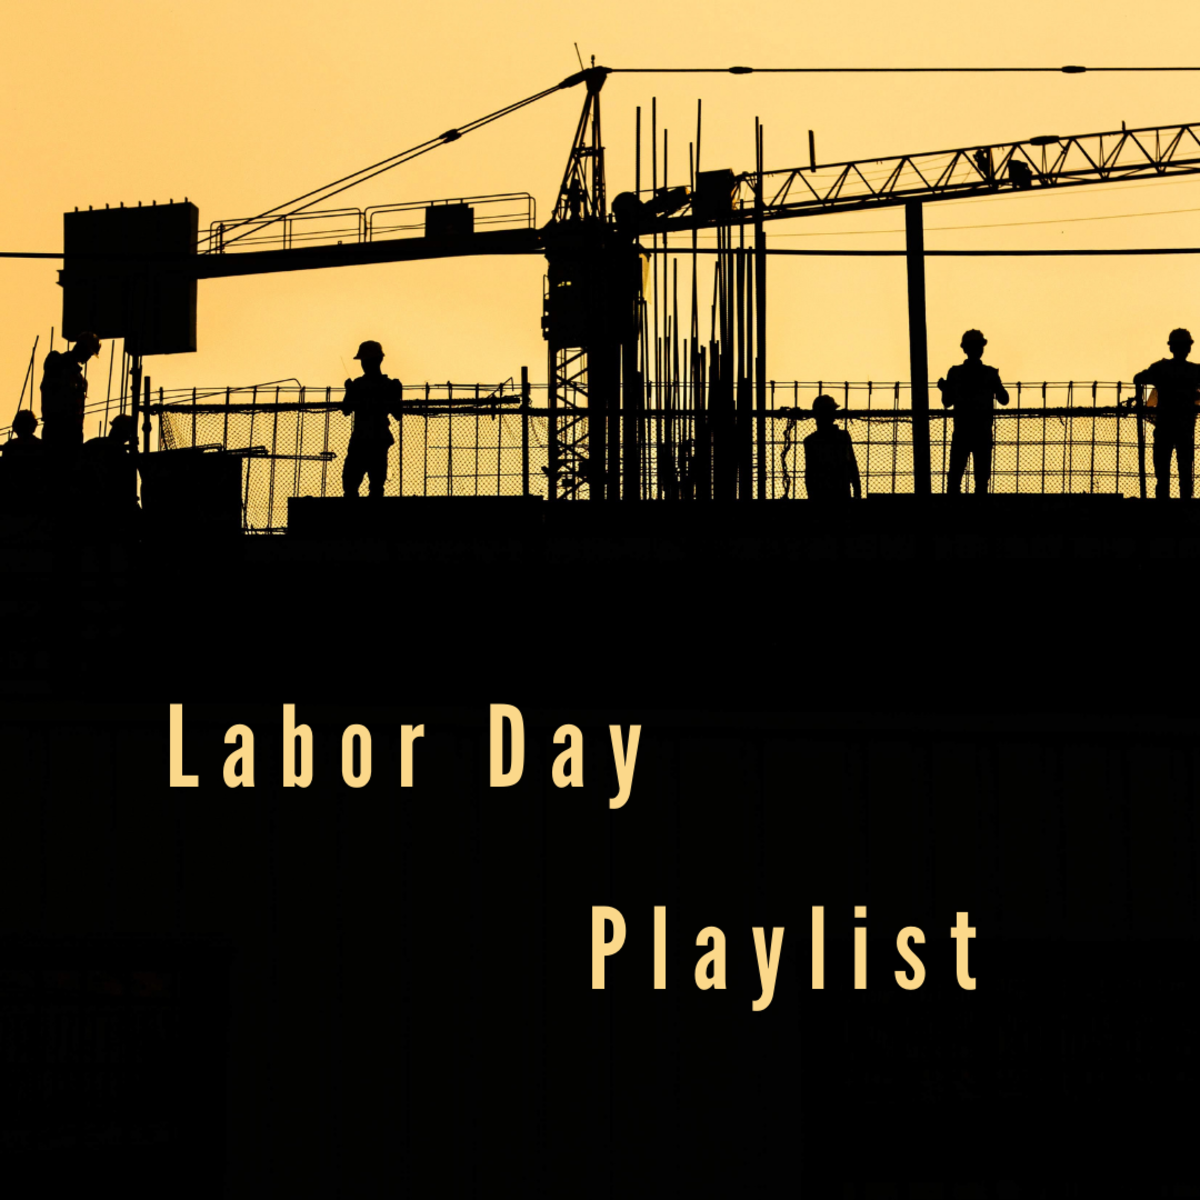 Best Labor Day Playlist: 10+ Songs That Celebrate Work